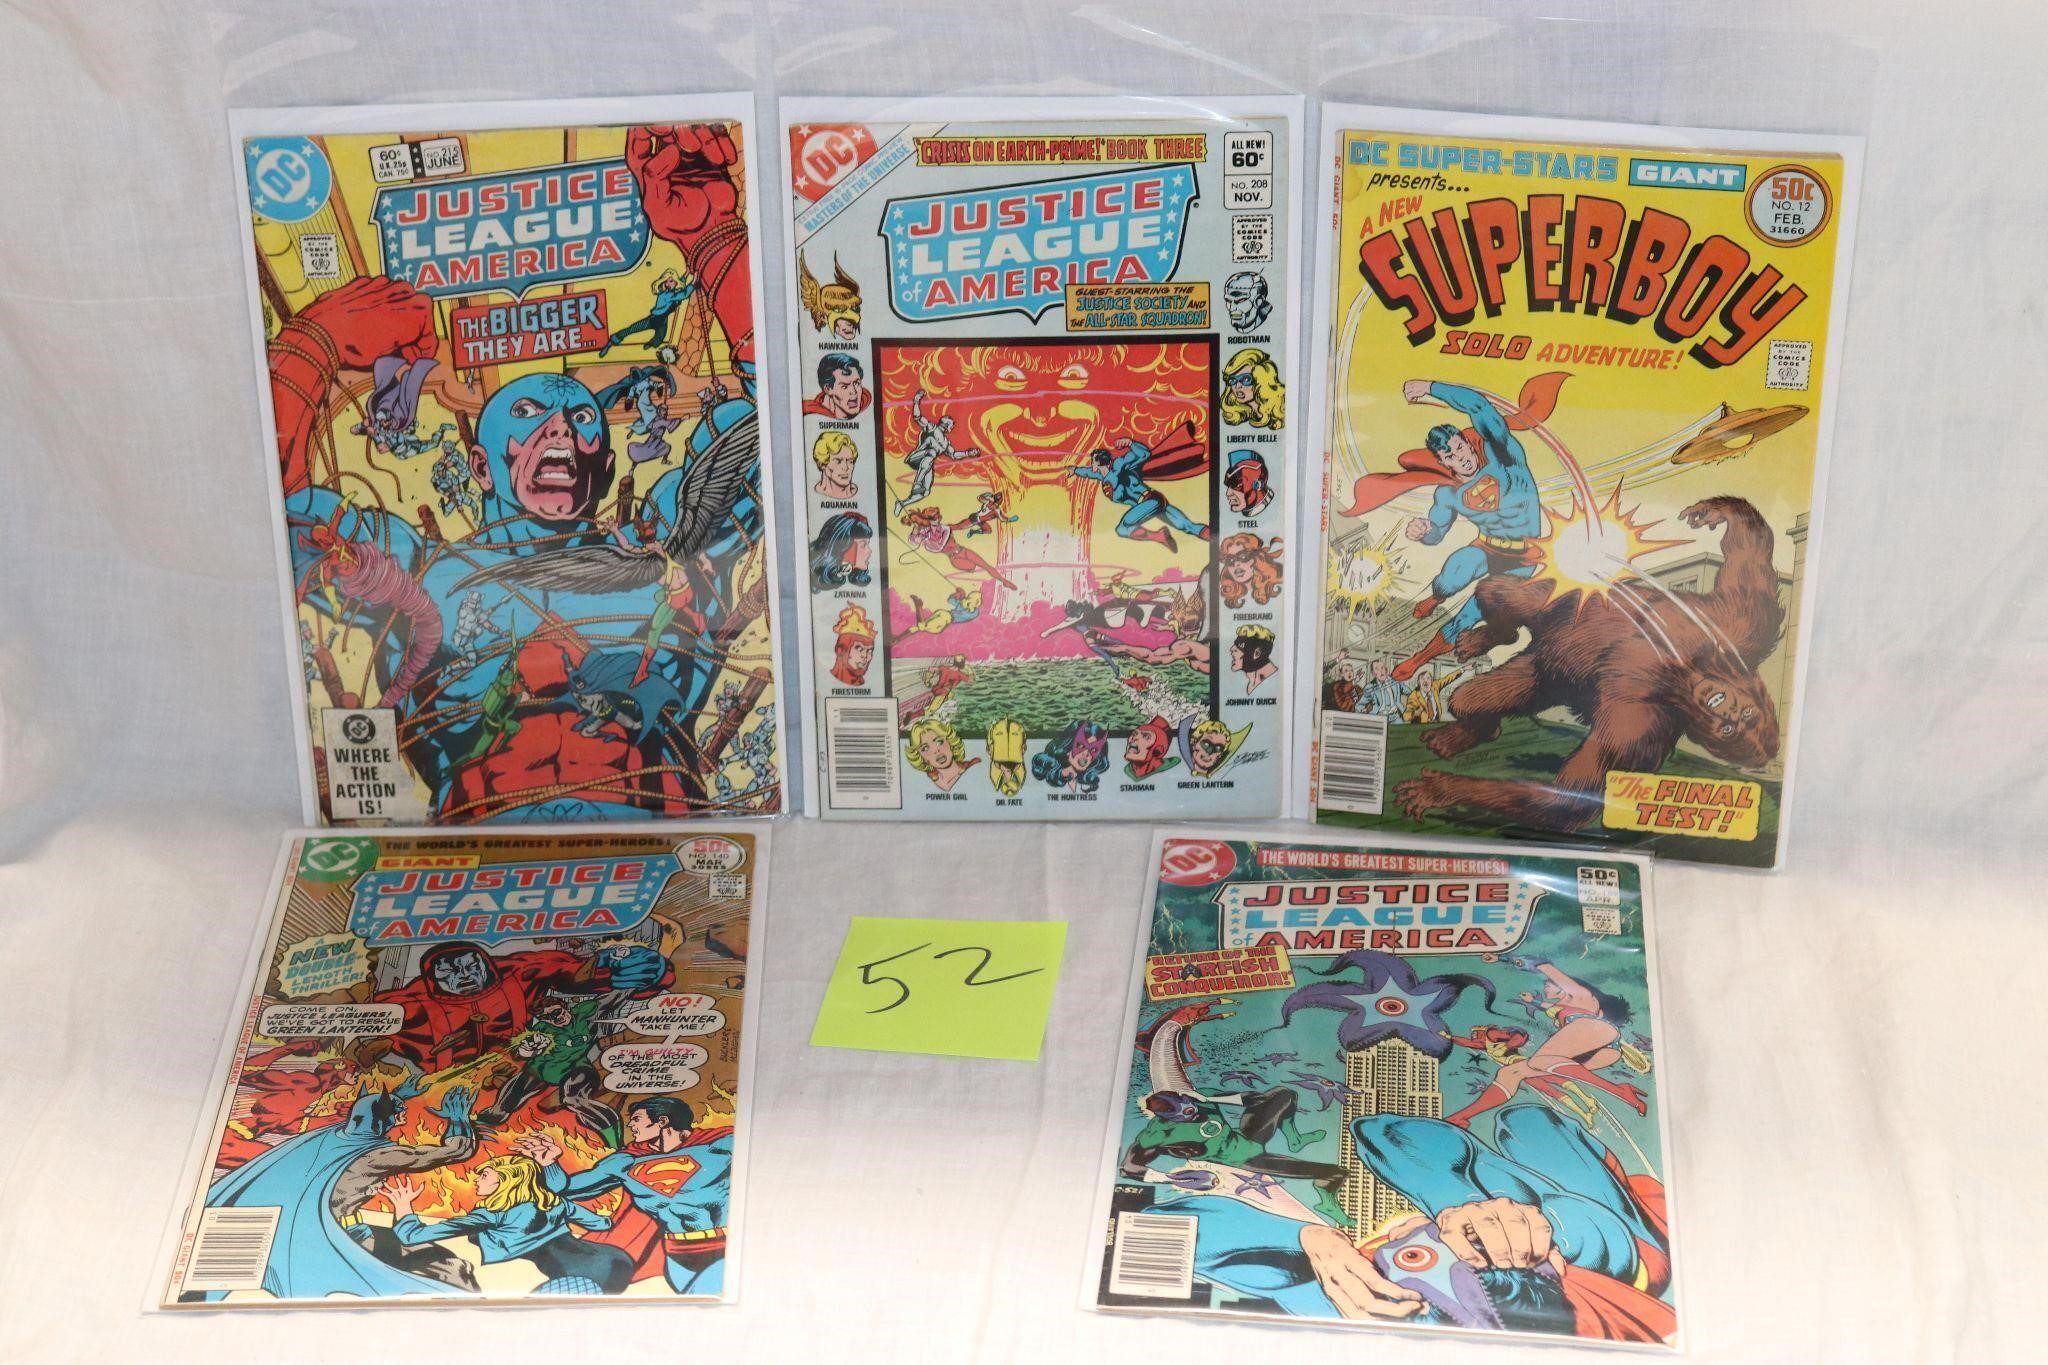 April Comic, Cards, and Toy Auction